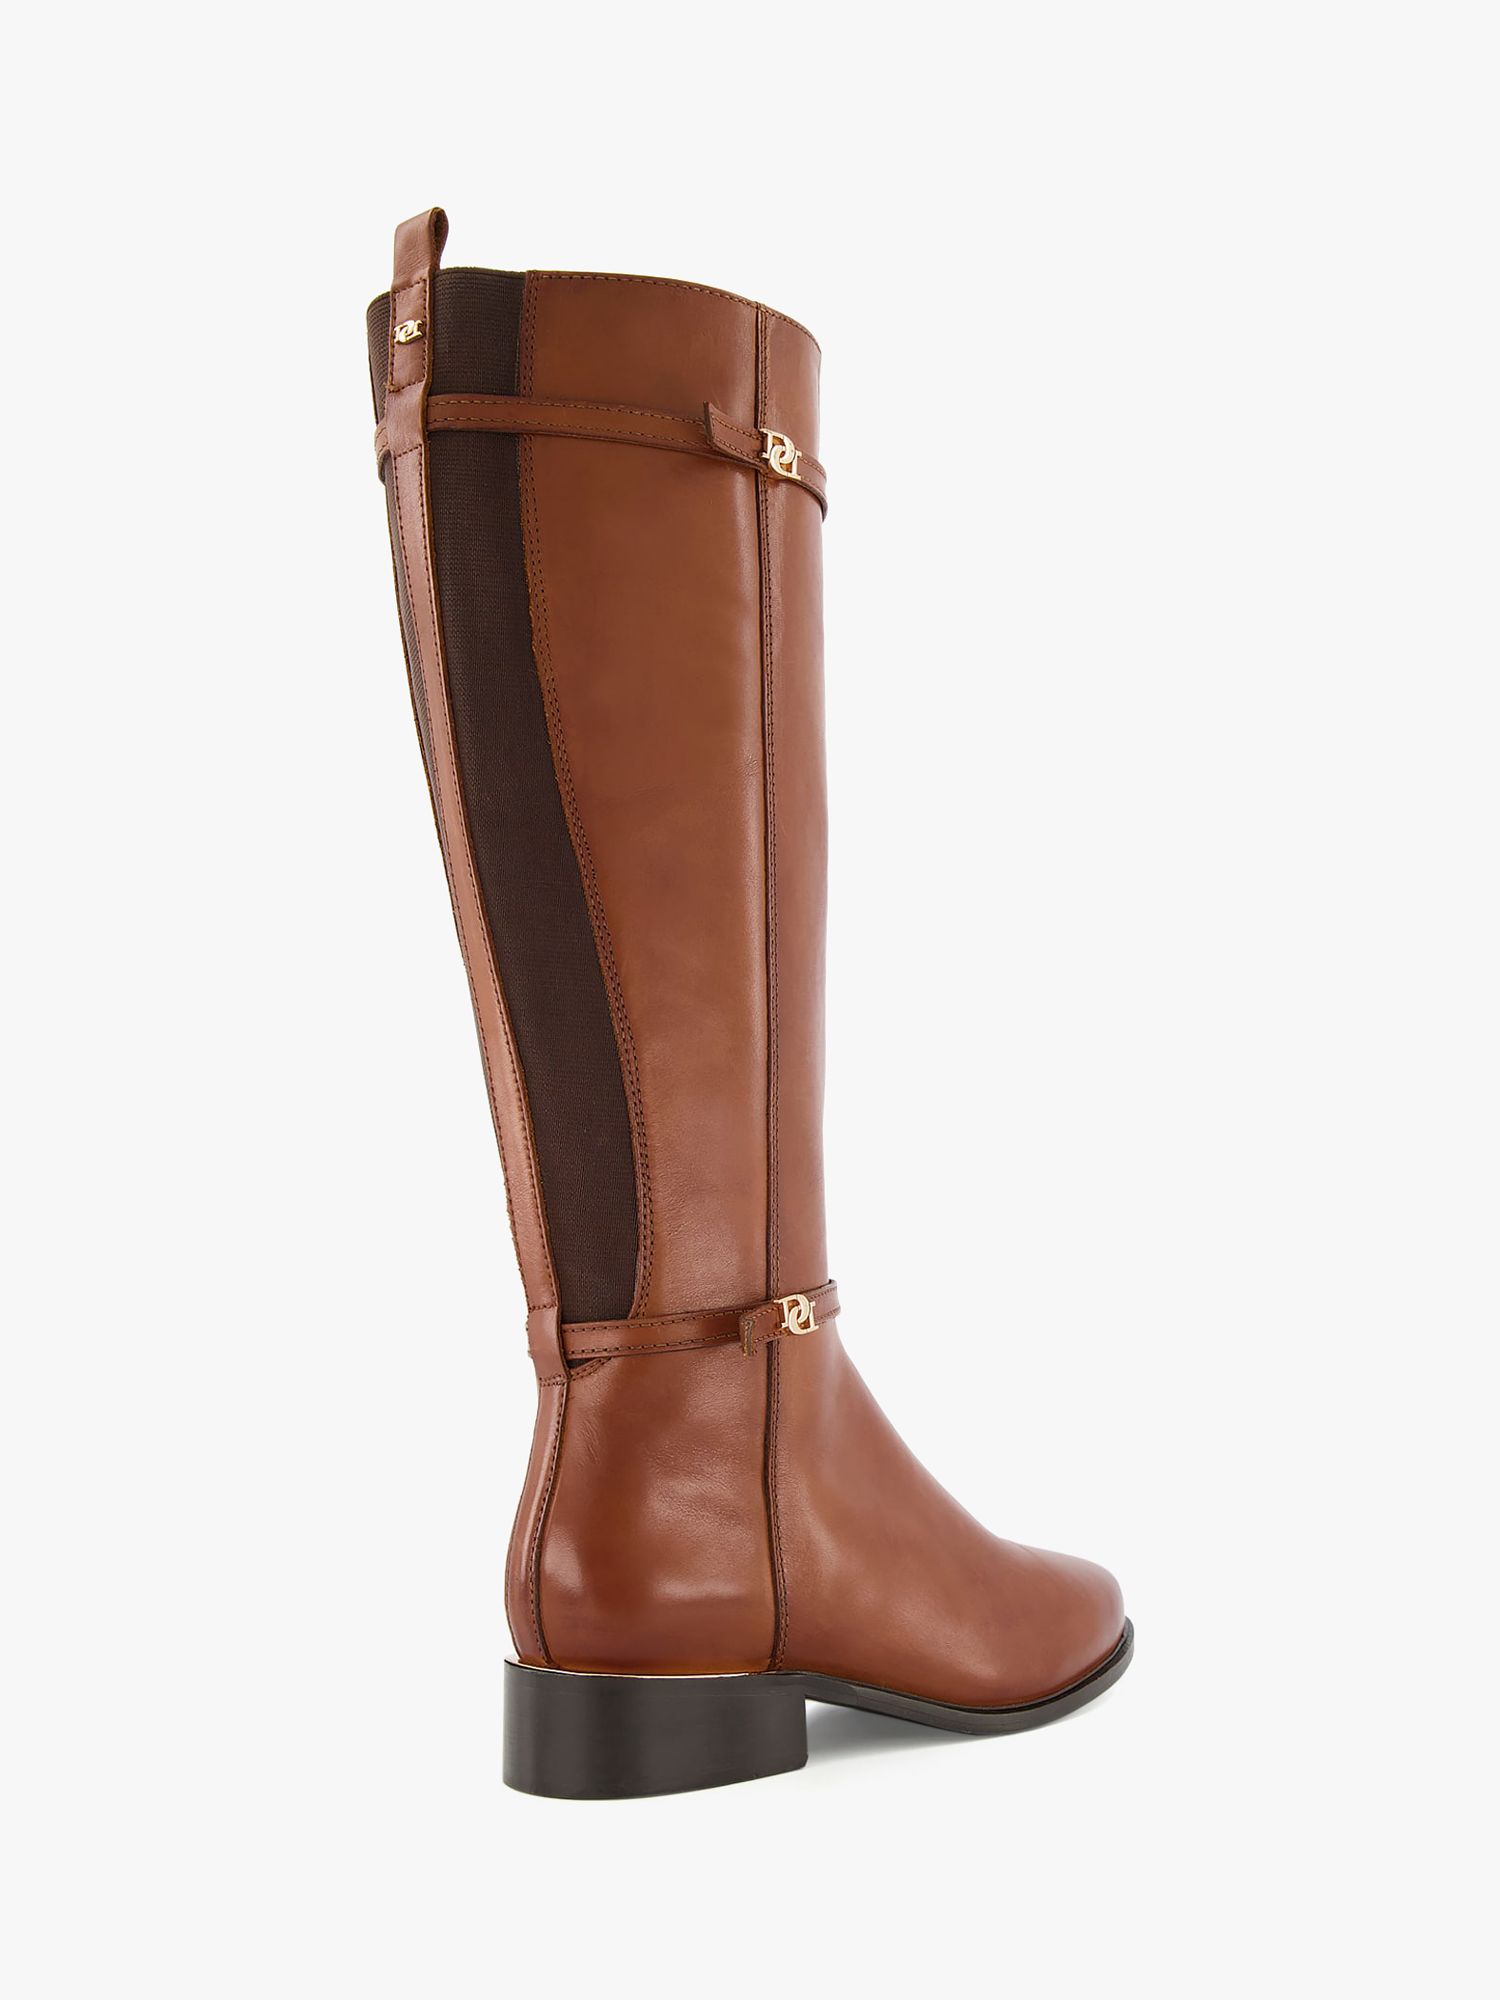 Dune Wide Fit Tap Leather Knee High Boots, Tan at John Lewis & Partners